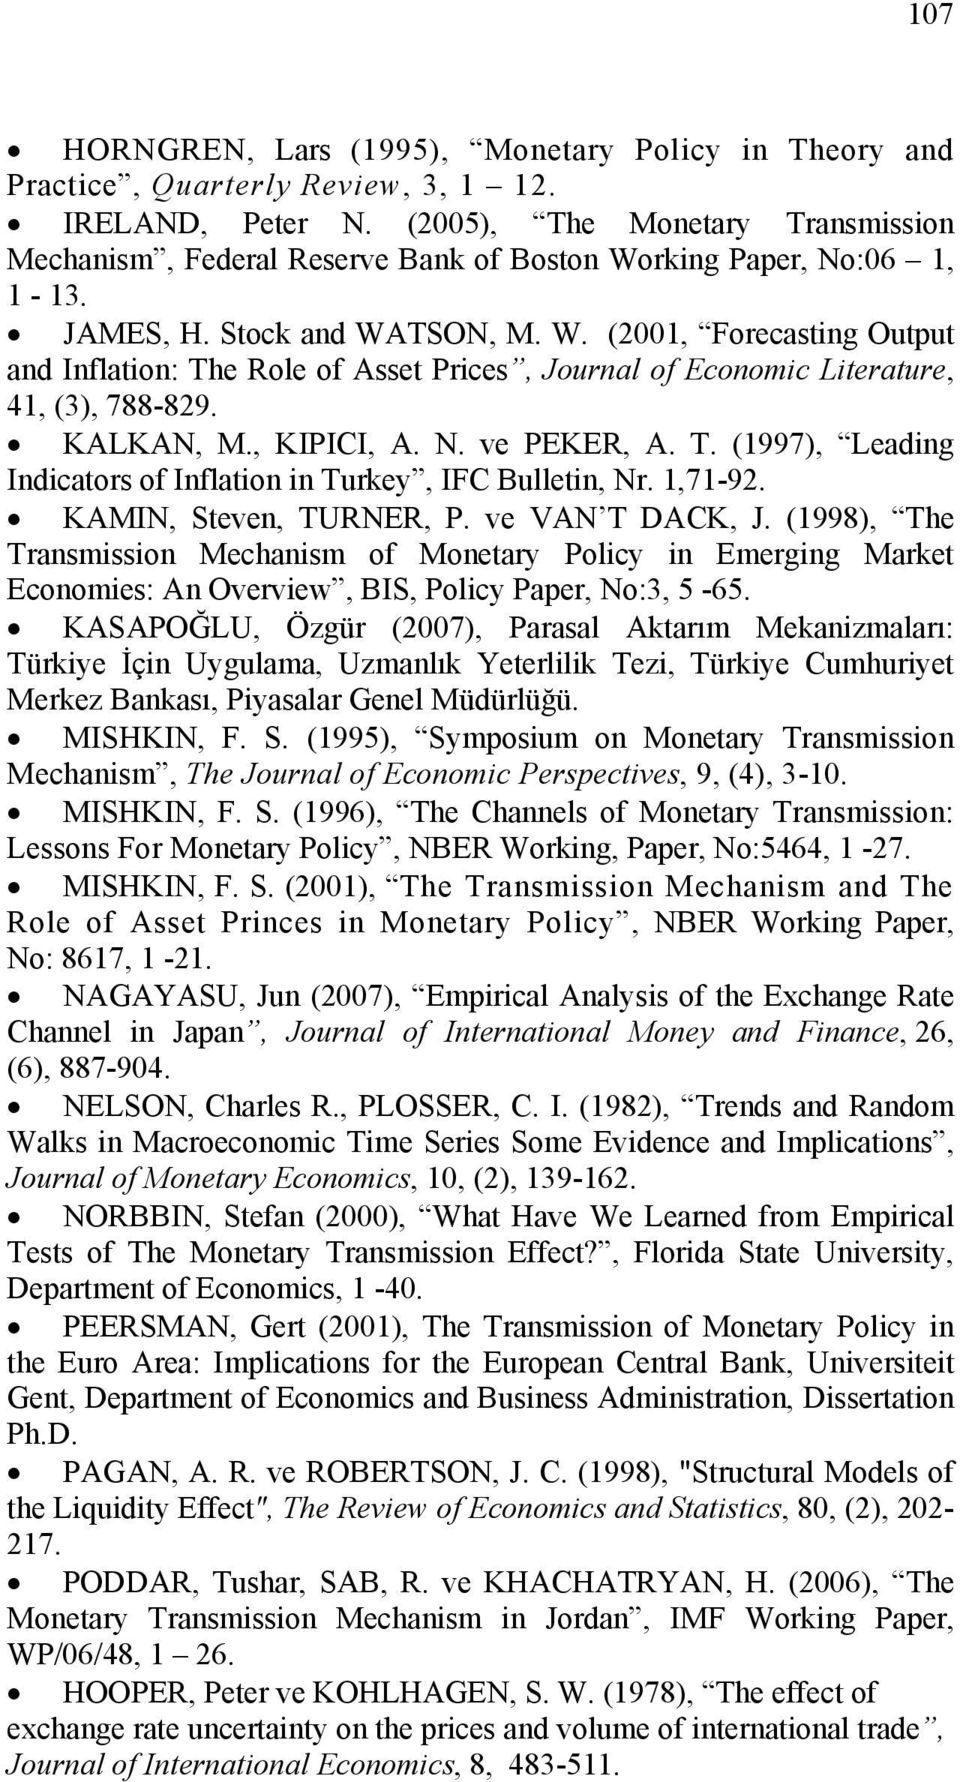 KALKAN, M., KIPICI, A. N. ve PEKER, A. T. (1997), Leading Indicaors of Inflaion in Turkey, IFC Bullein, Nr. 1,71-92. KAMIN, Seven, TURNER, P. ve VAN T DACK, J.